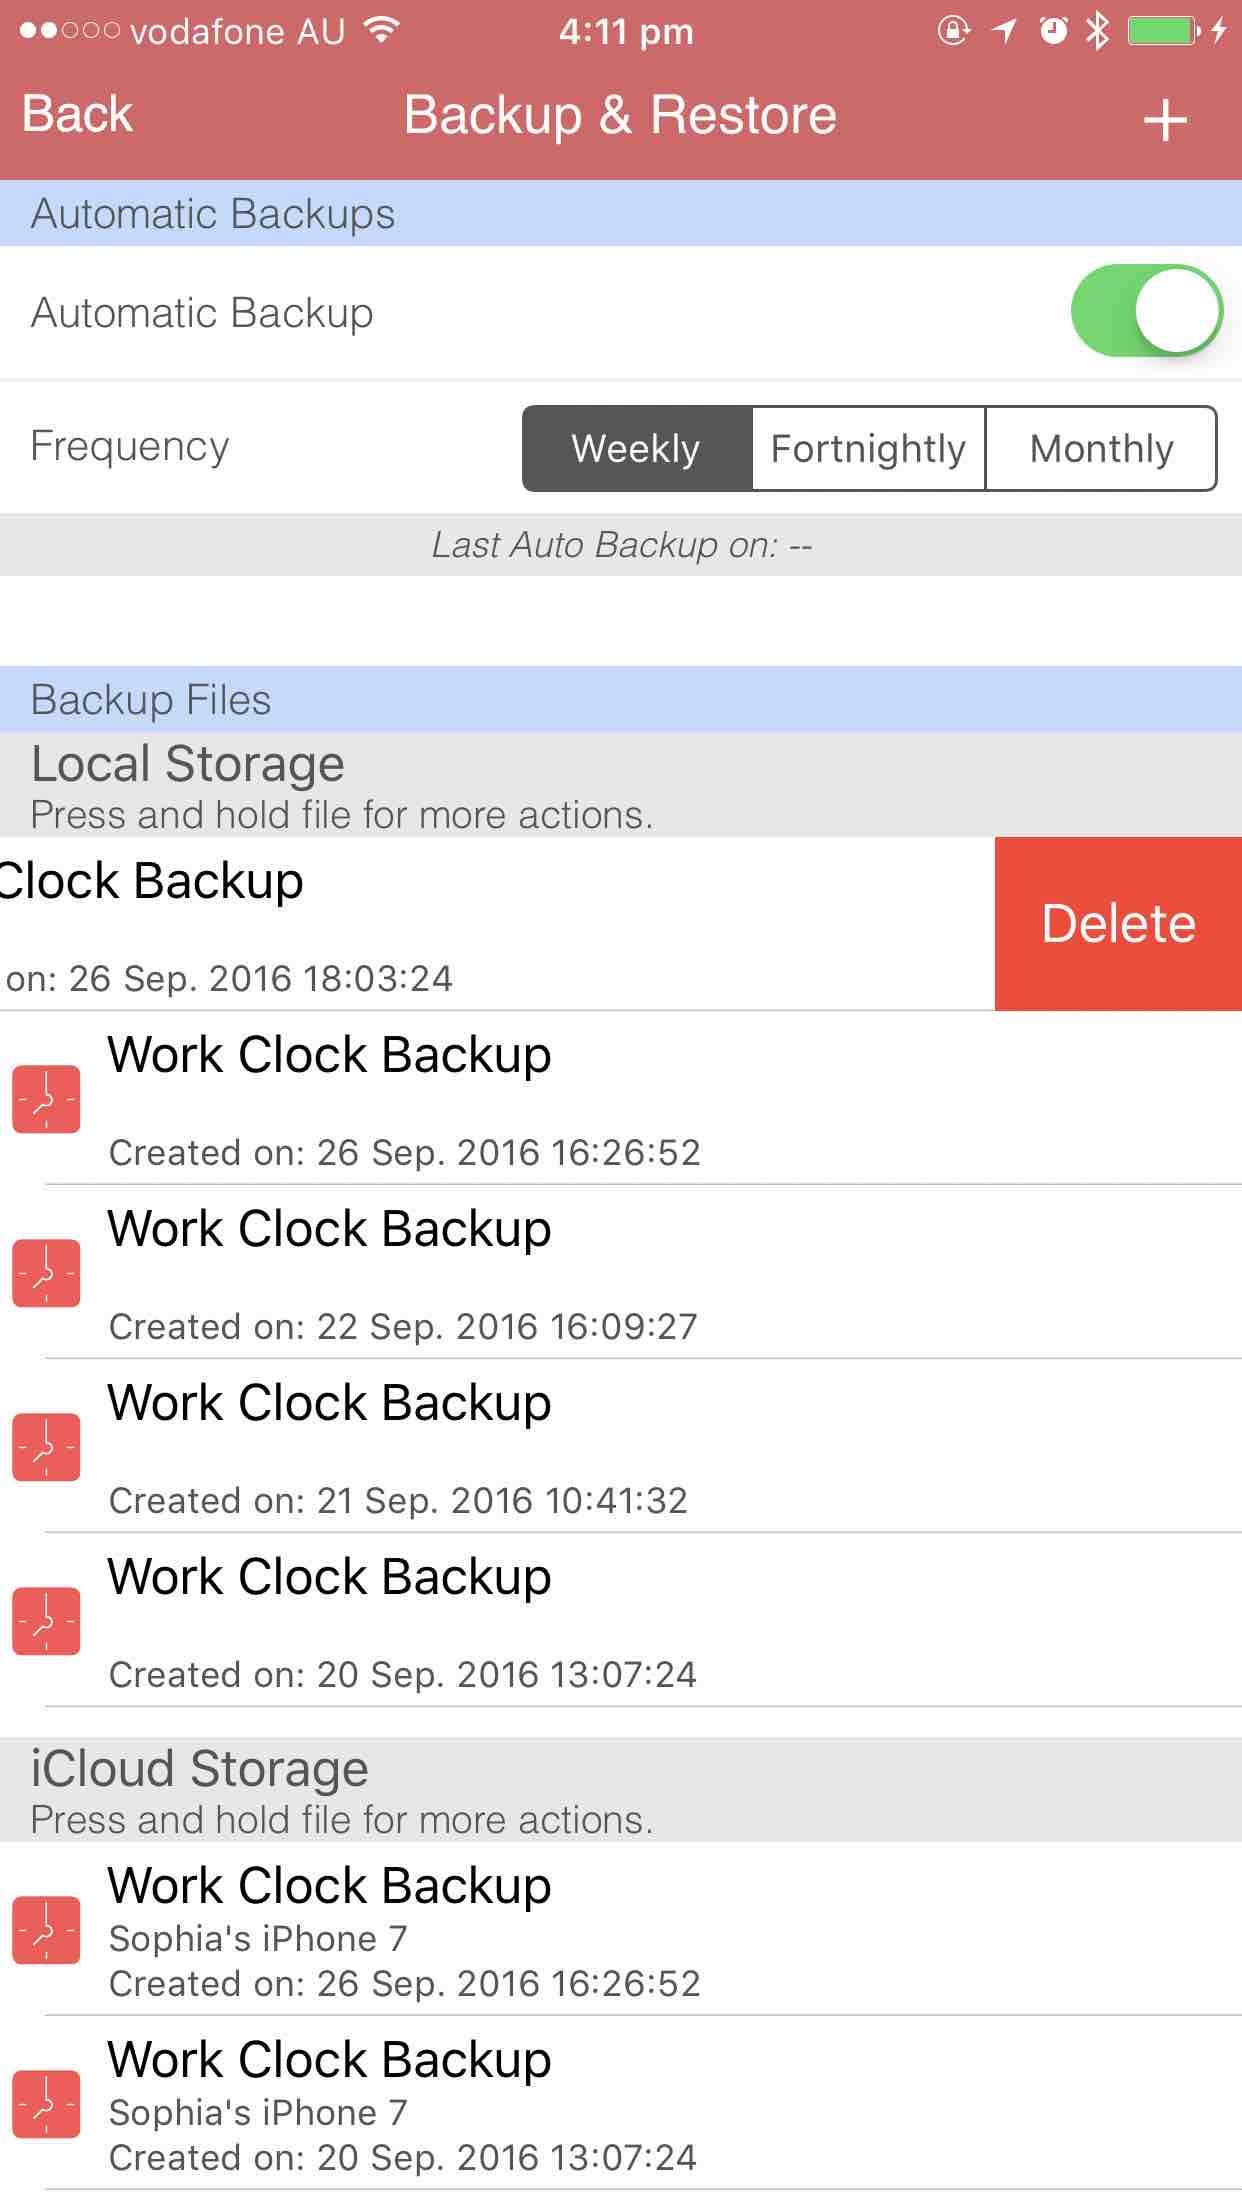 Deleting a backup for Work Clock